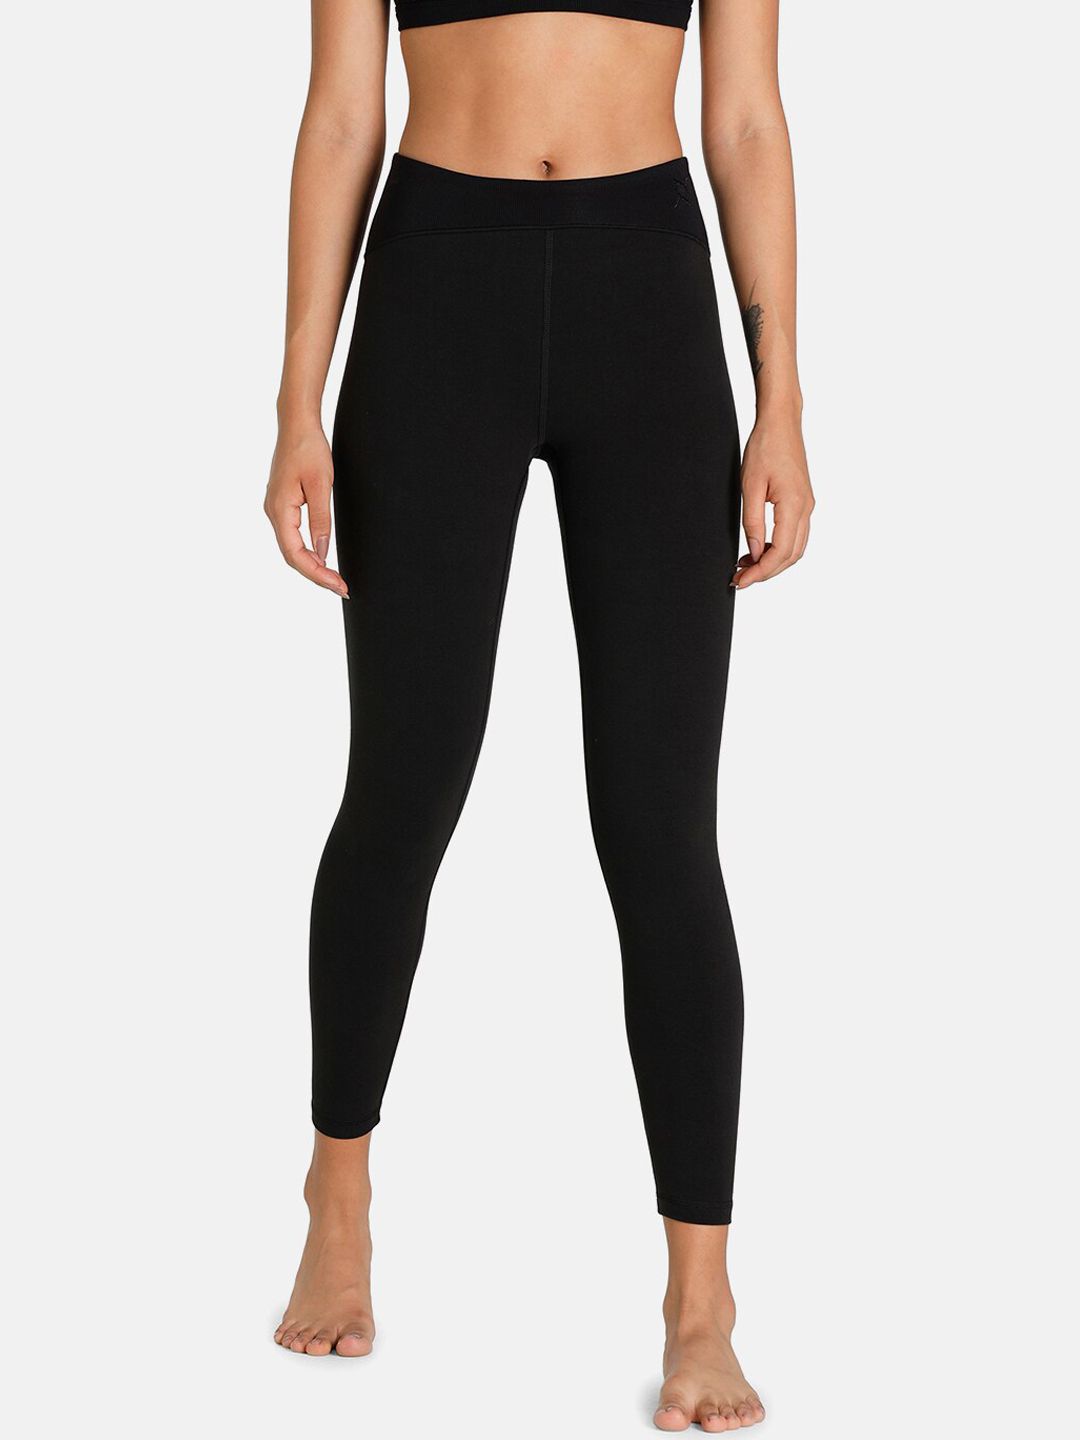 Puma Women Black Solid High Waist Sustainable Yoga Tights Price in India